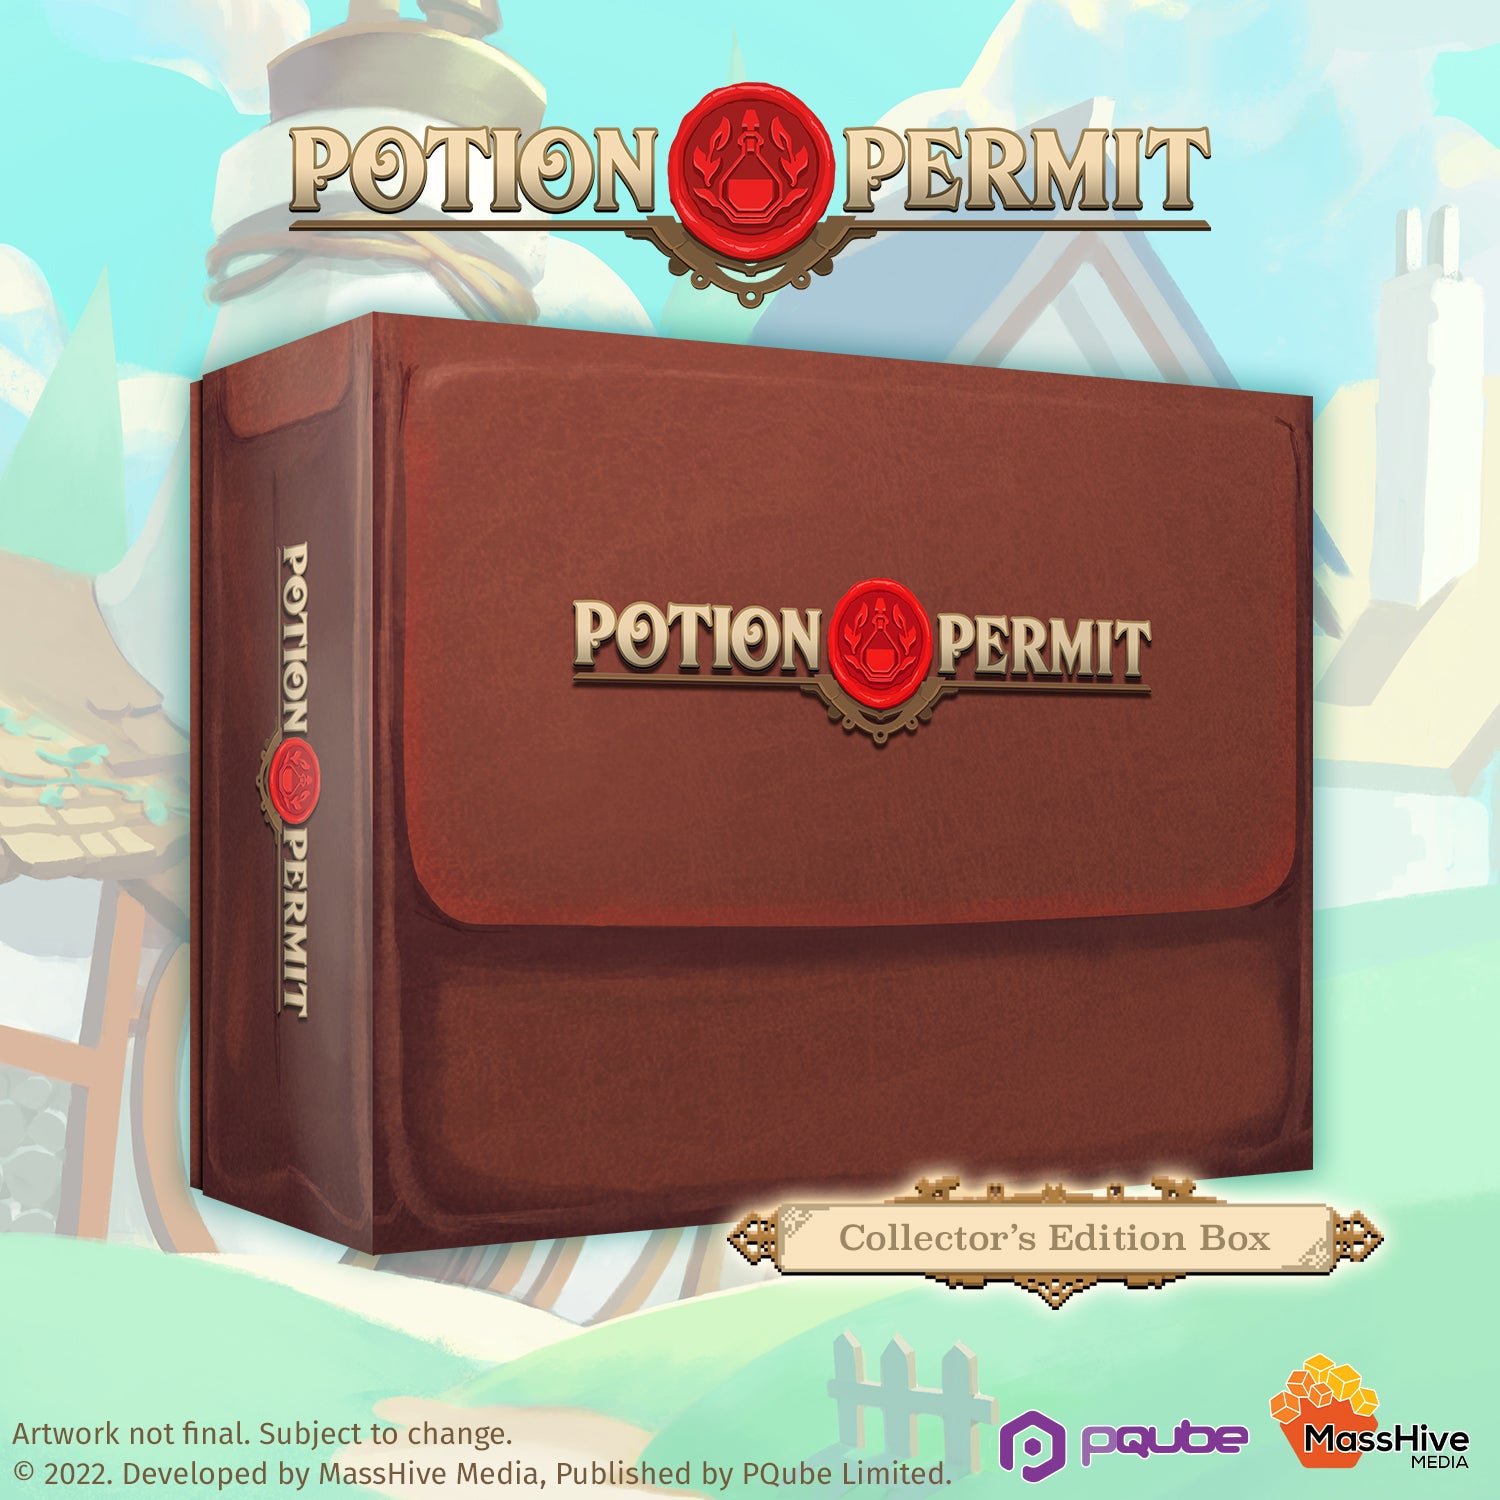 Potion Permit download the new version for ipod